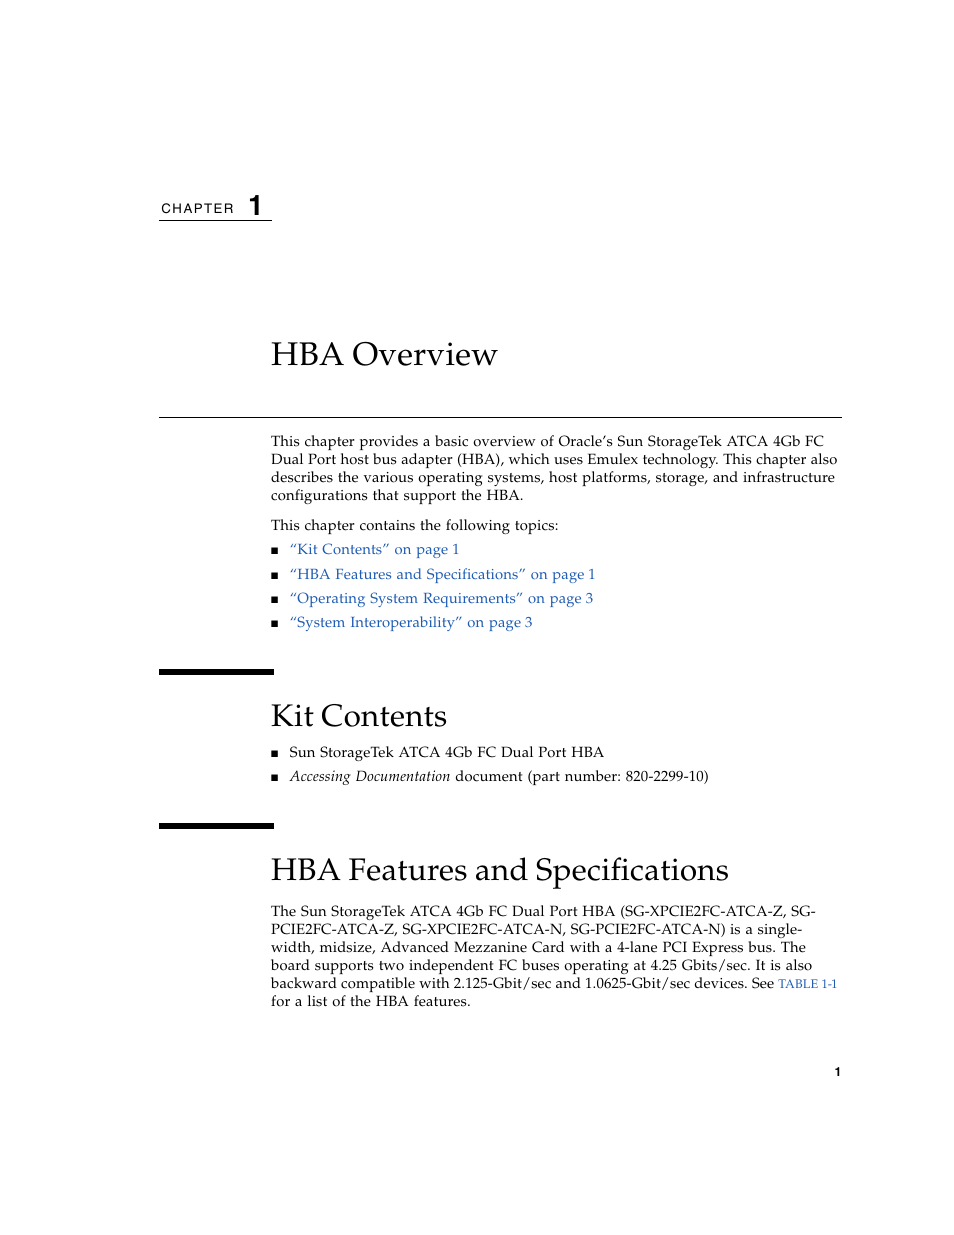 Hba overview, Kit contents, Hba features and specifications | Oracle Audio Technologies Sun StorageTek ATCA 4Gb FC Dual Port HBA SG-XPCIE2FC-ATCA-Z User Manual | Page 7 / 48